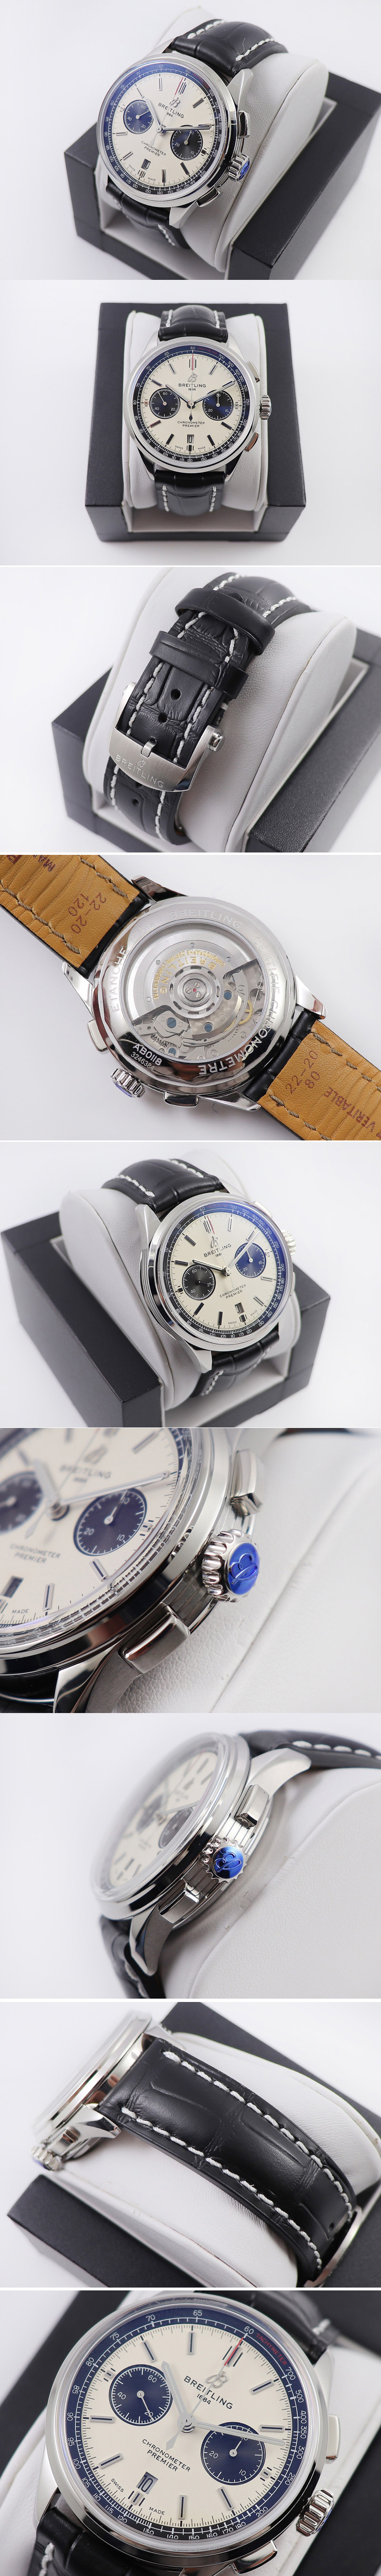 Replica Breitling Premier B01 Chronograph 42 Steel Watch GF Best Edtion in White Dial and Black Leather With A7750